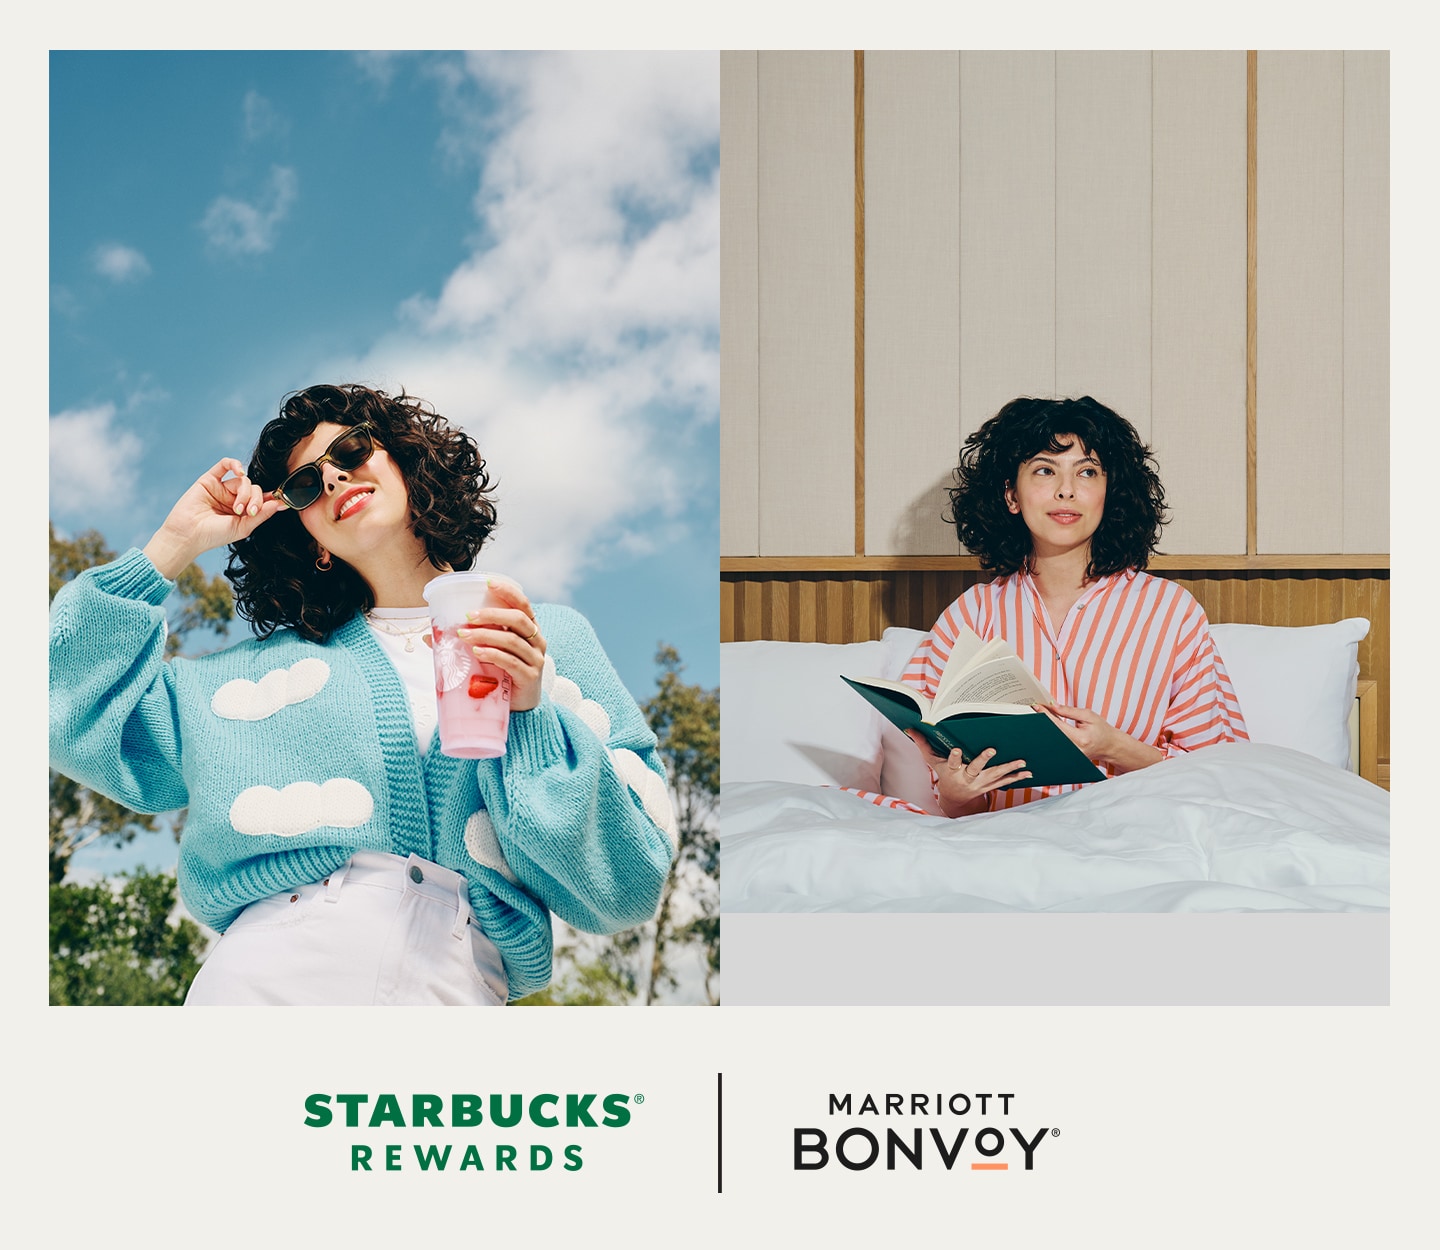 Image of woman outside with Starbucks® drink and another image of her in bed reading. Both images are in a sand-colored border. 'STARBUCKS REWARDS' and 'MARRIOTT BONVOY' logos appear.